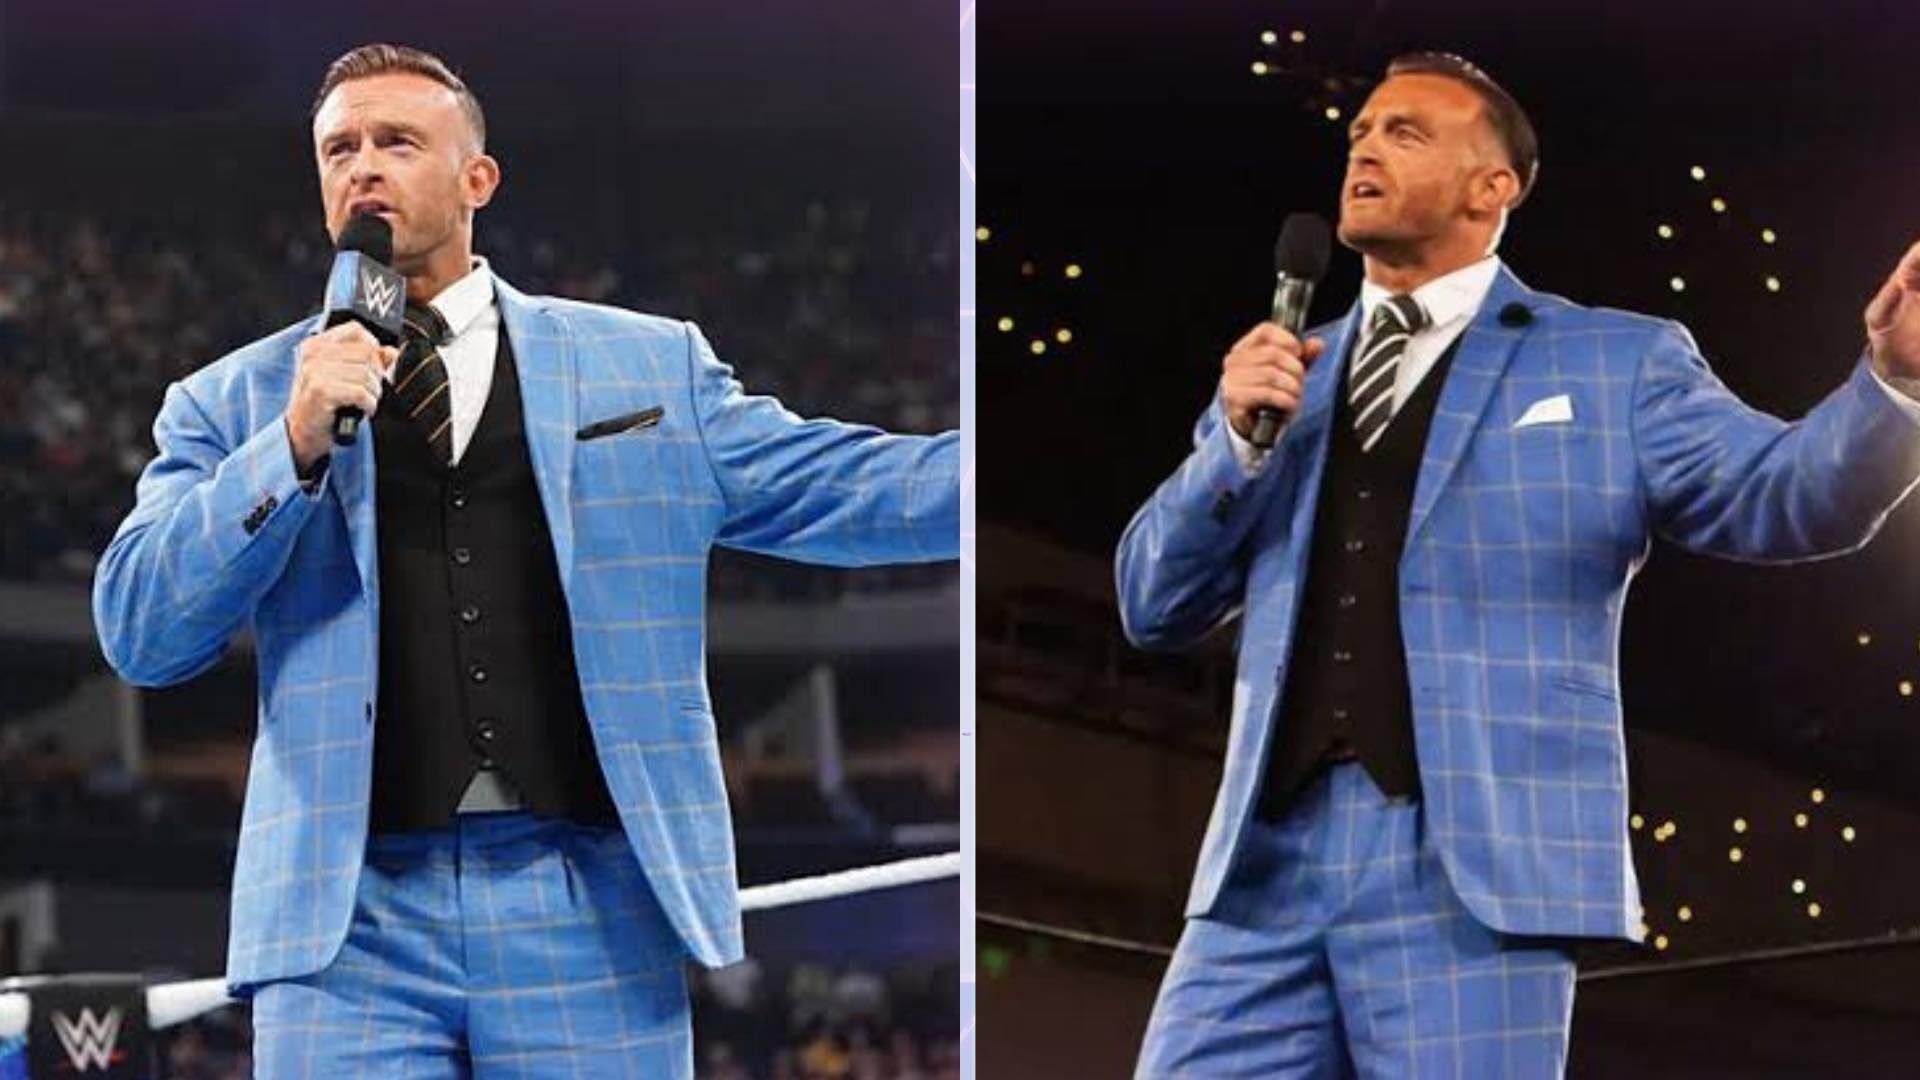 Nick Aldis is the General Manager of WWE SmackDown.